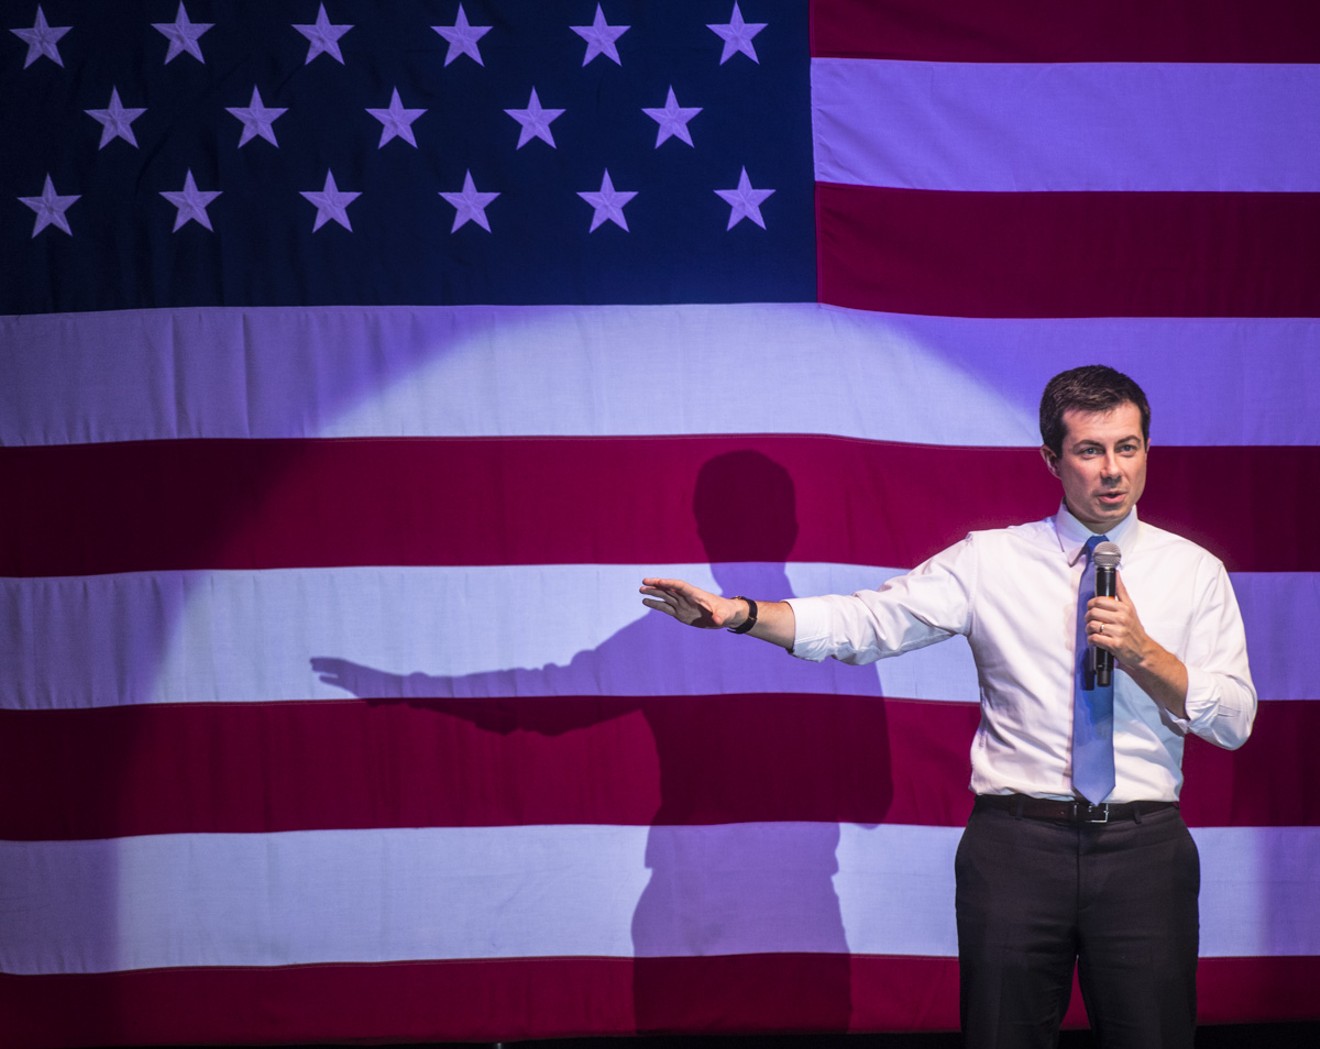 Former South Bend mayor and Democratic presidential candidate Pete Buttigieg addresses a crowd of supporters in Denver.